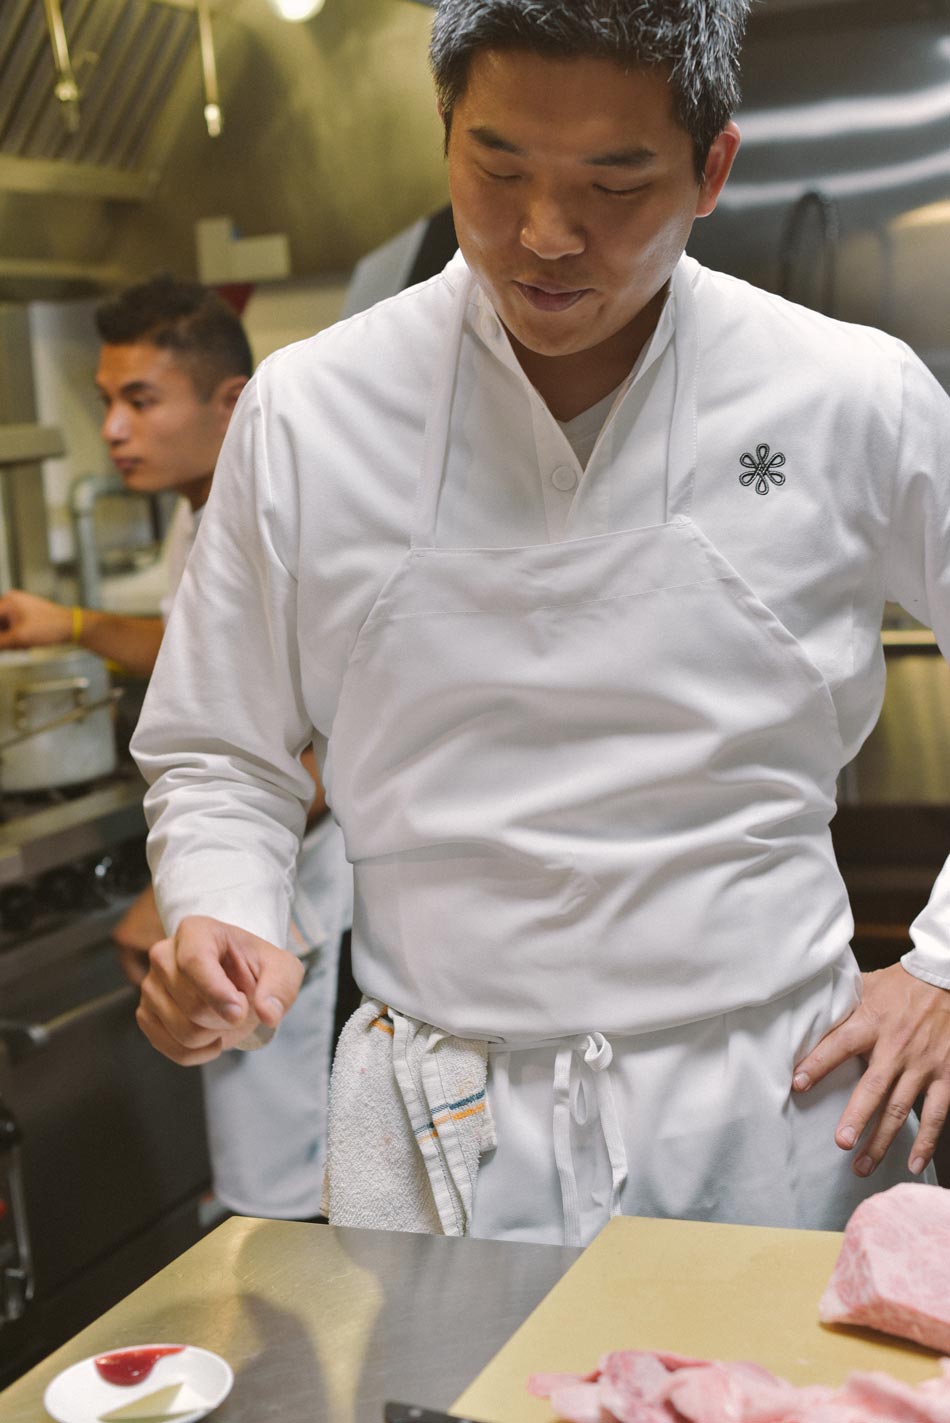 Though focused and disciplined, chef Anh enjoys his time in the kitchen. 